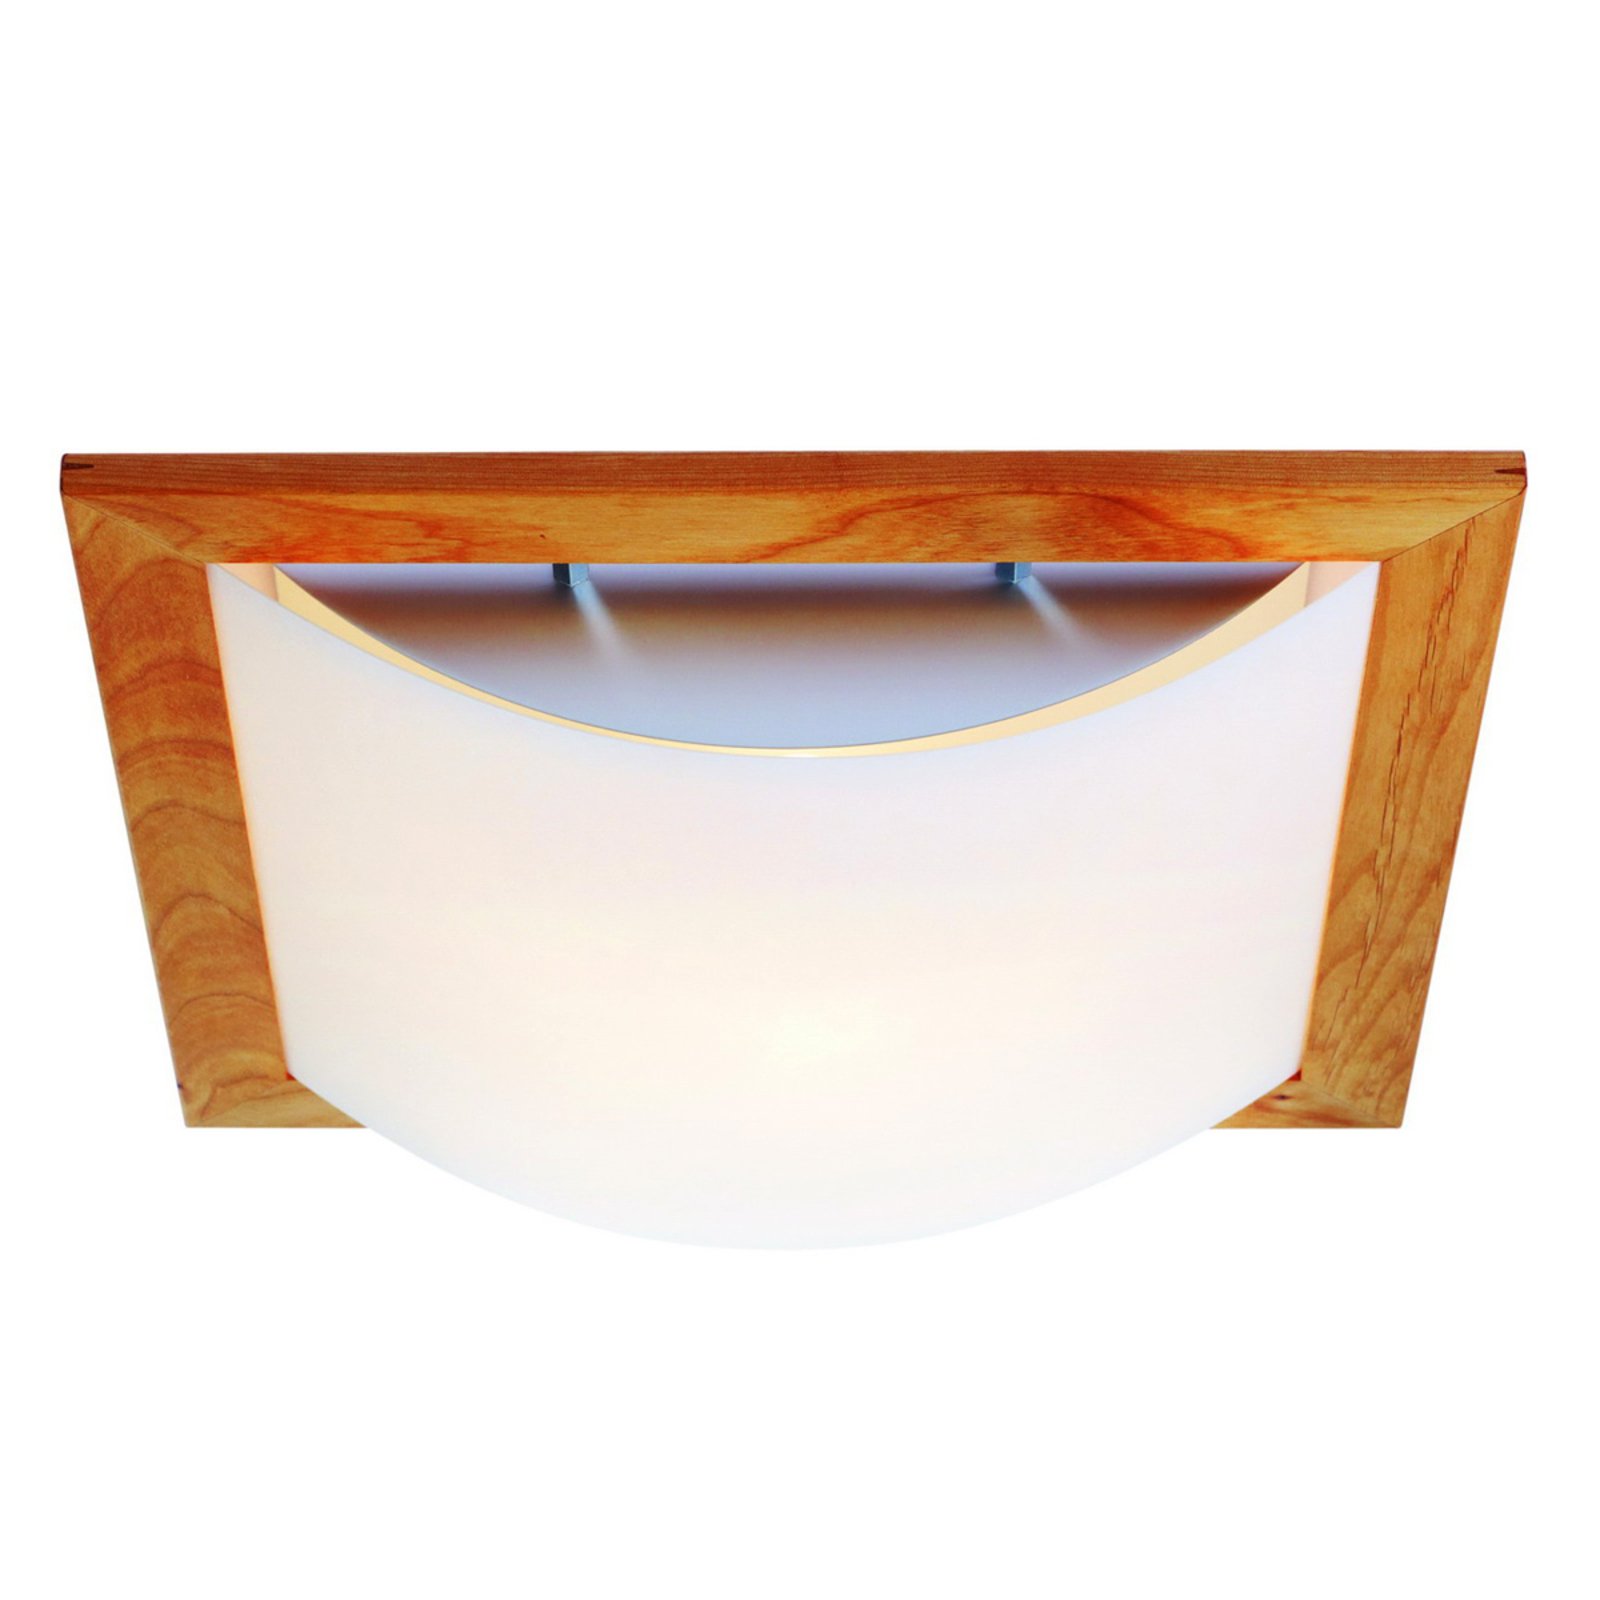 Stella ceiling light with wood and lunopal